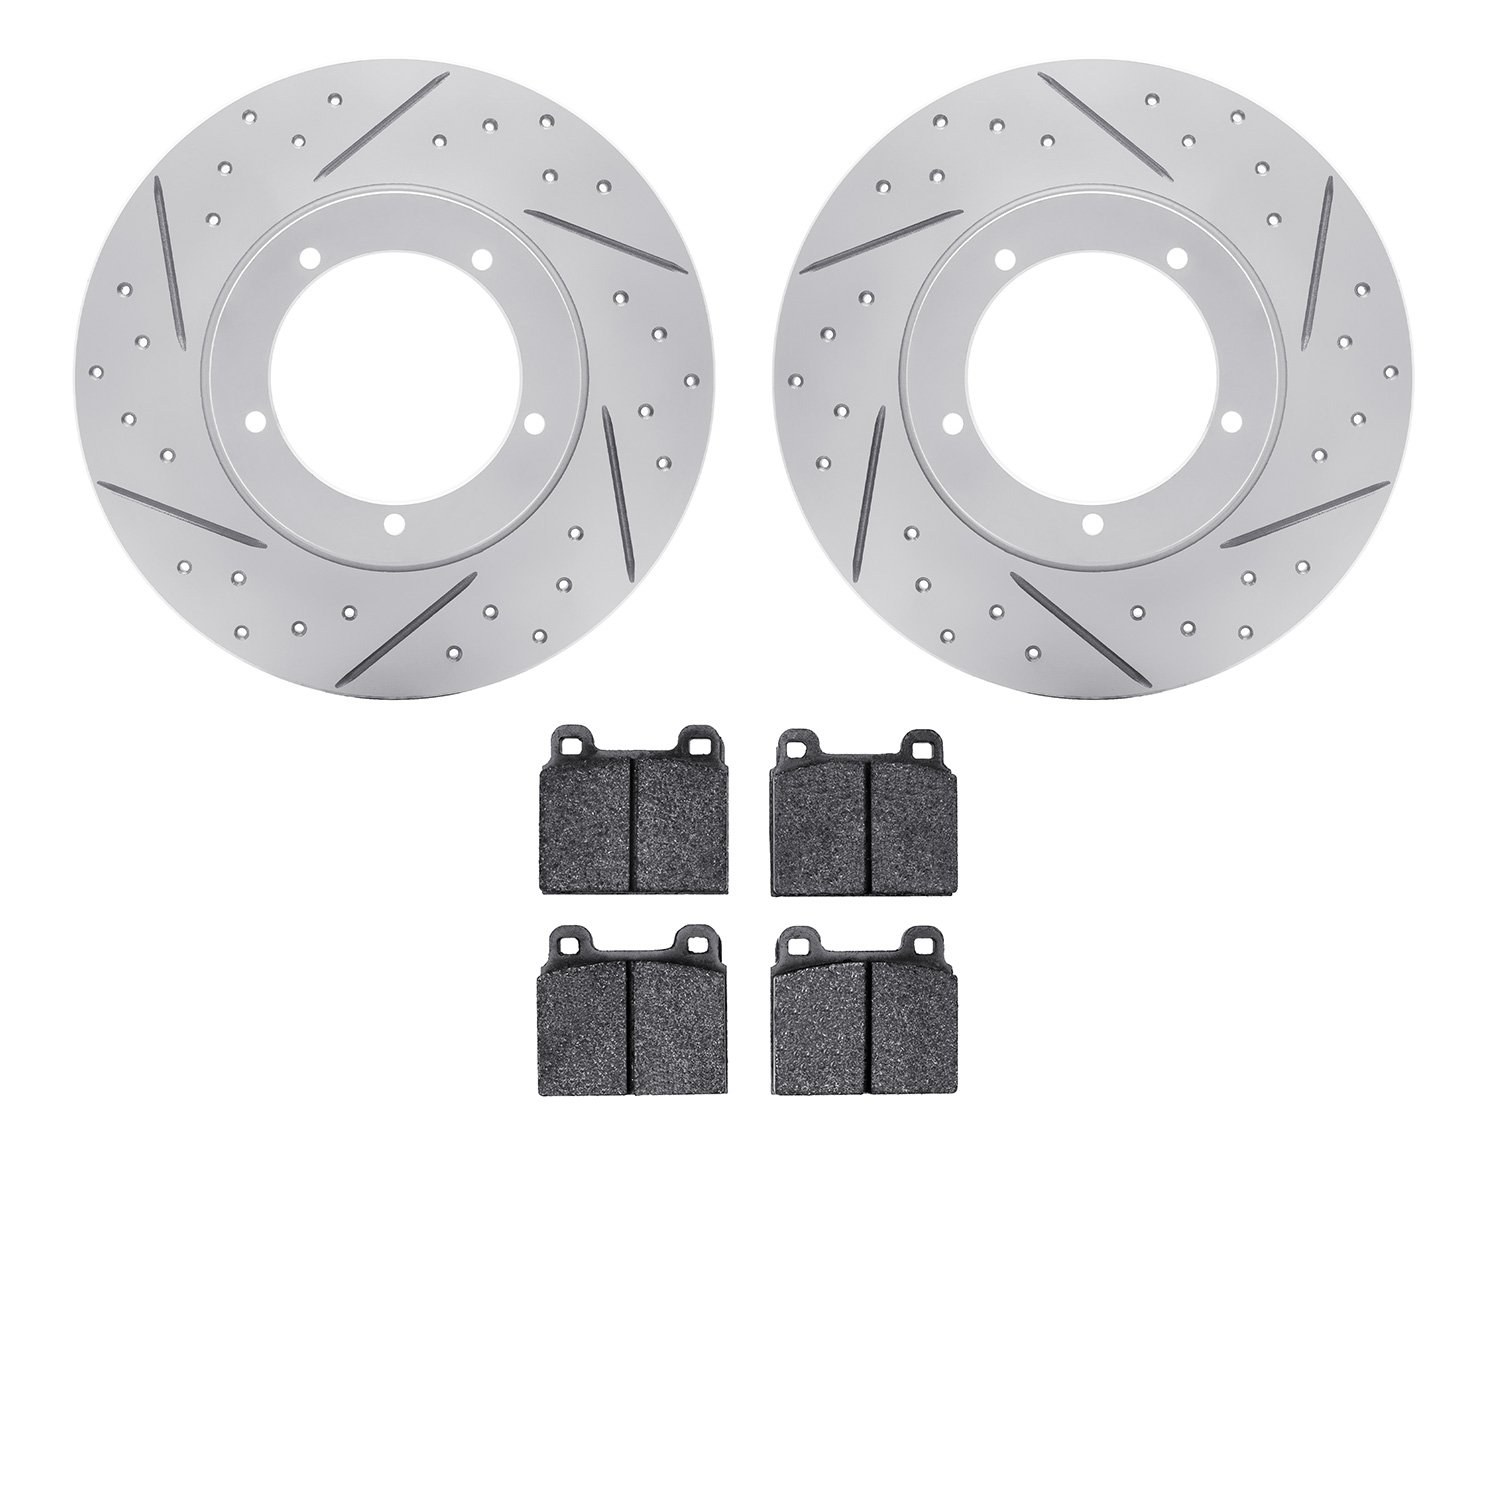 2502-02001 Geoperformance Drilled/Slotted Rotors w/5000 Advanced Brake Pads Kit, 1976-1976 Porsche, Position: Front